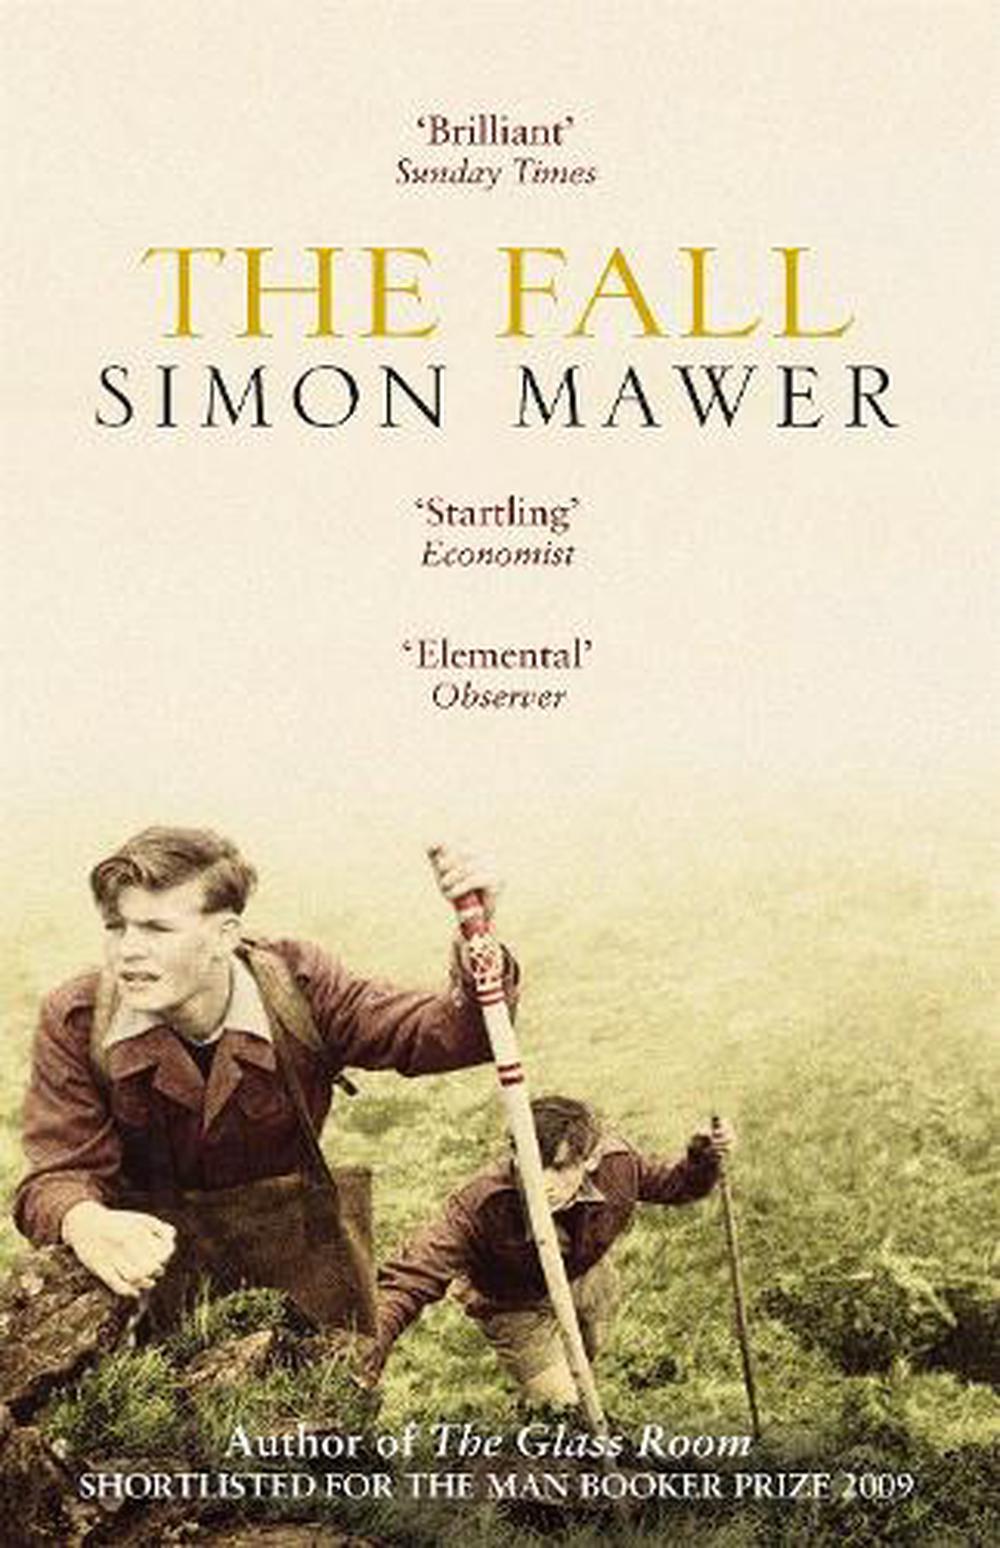 online　by　Paperback,　Nile　The　The　Mawer,　at　Fall　Buy　Simon　9780349116525